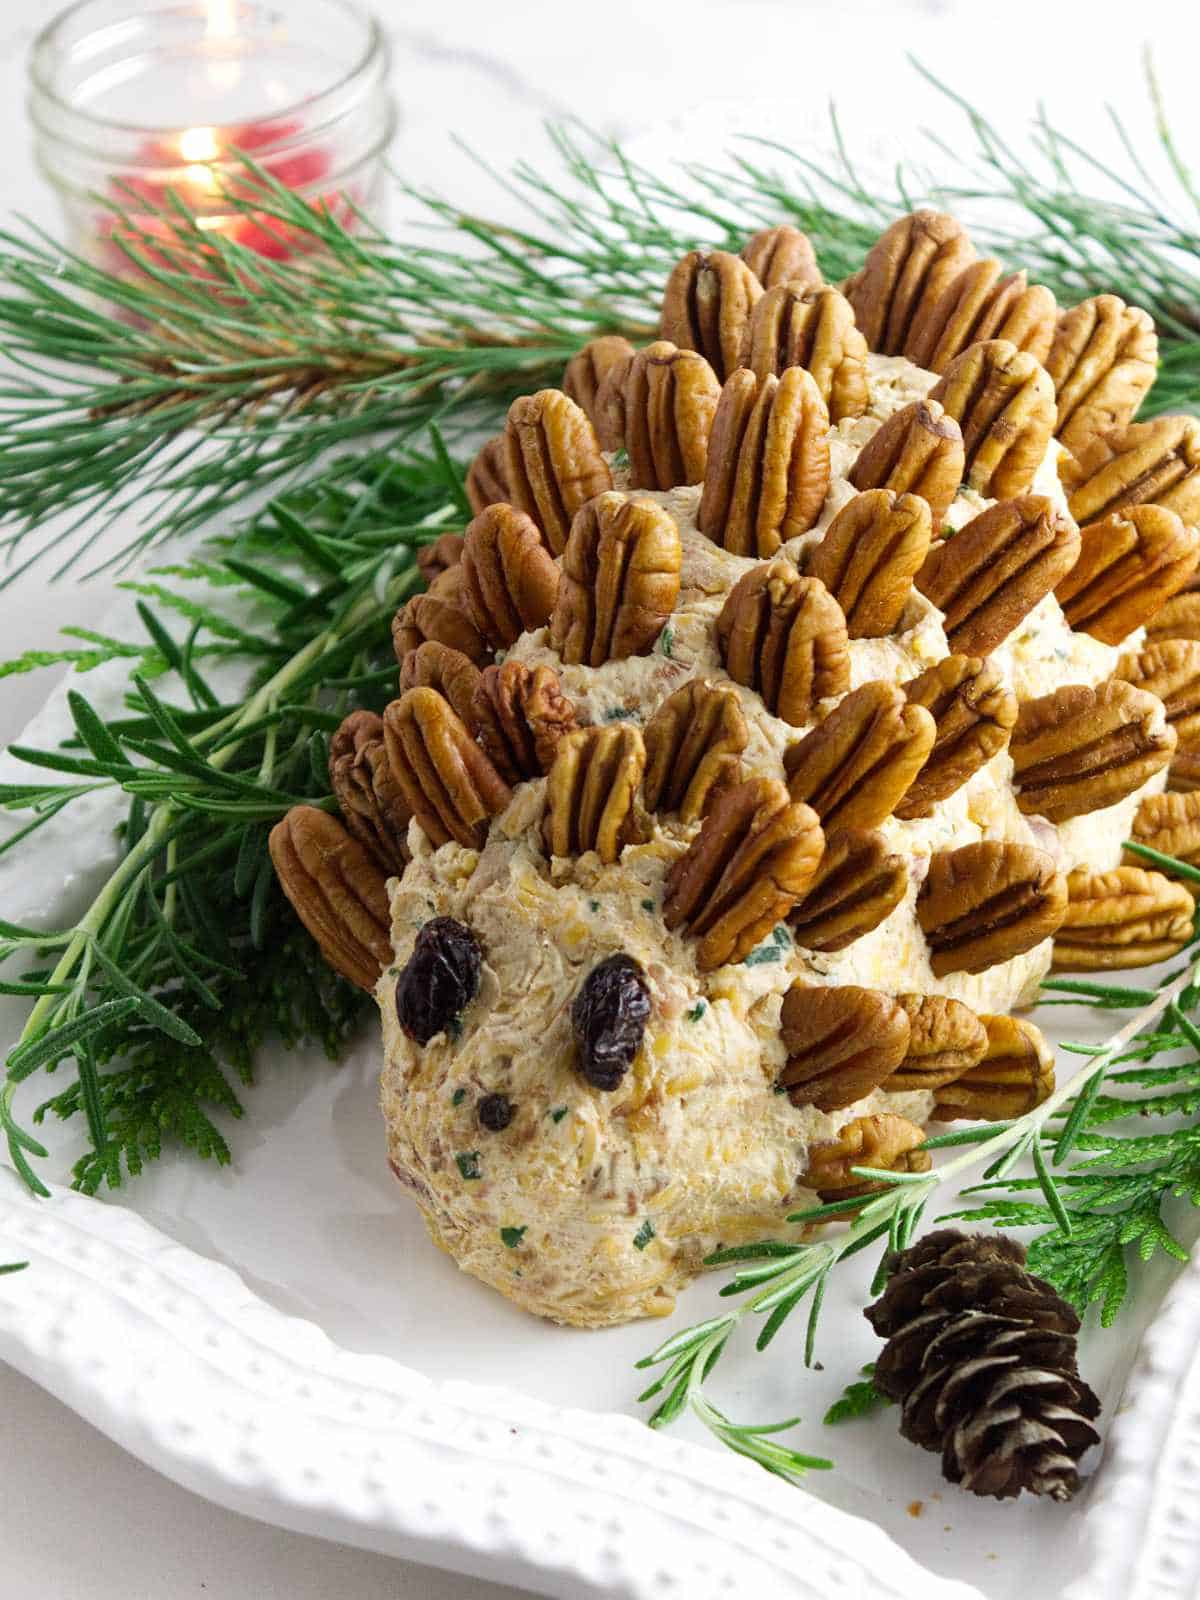 pecan studded holiday cheese ball in shape of a hedgehog.